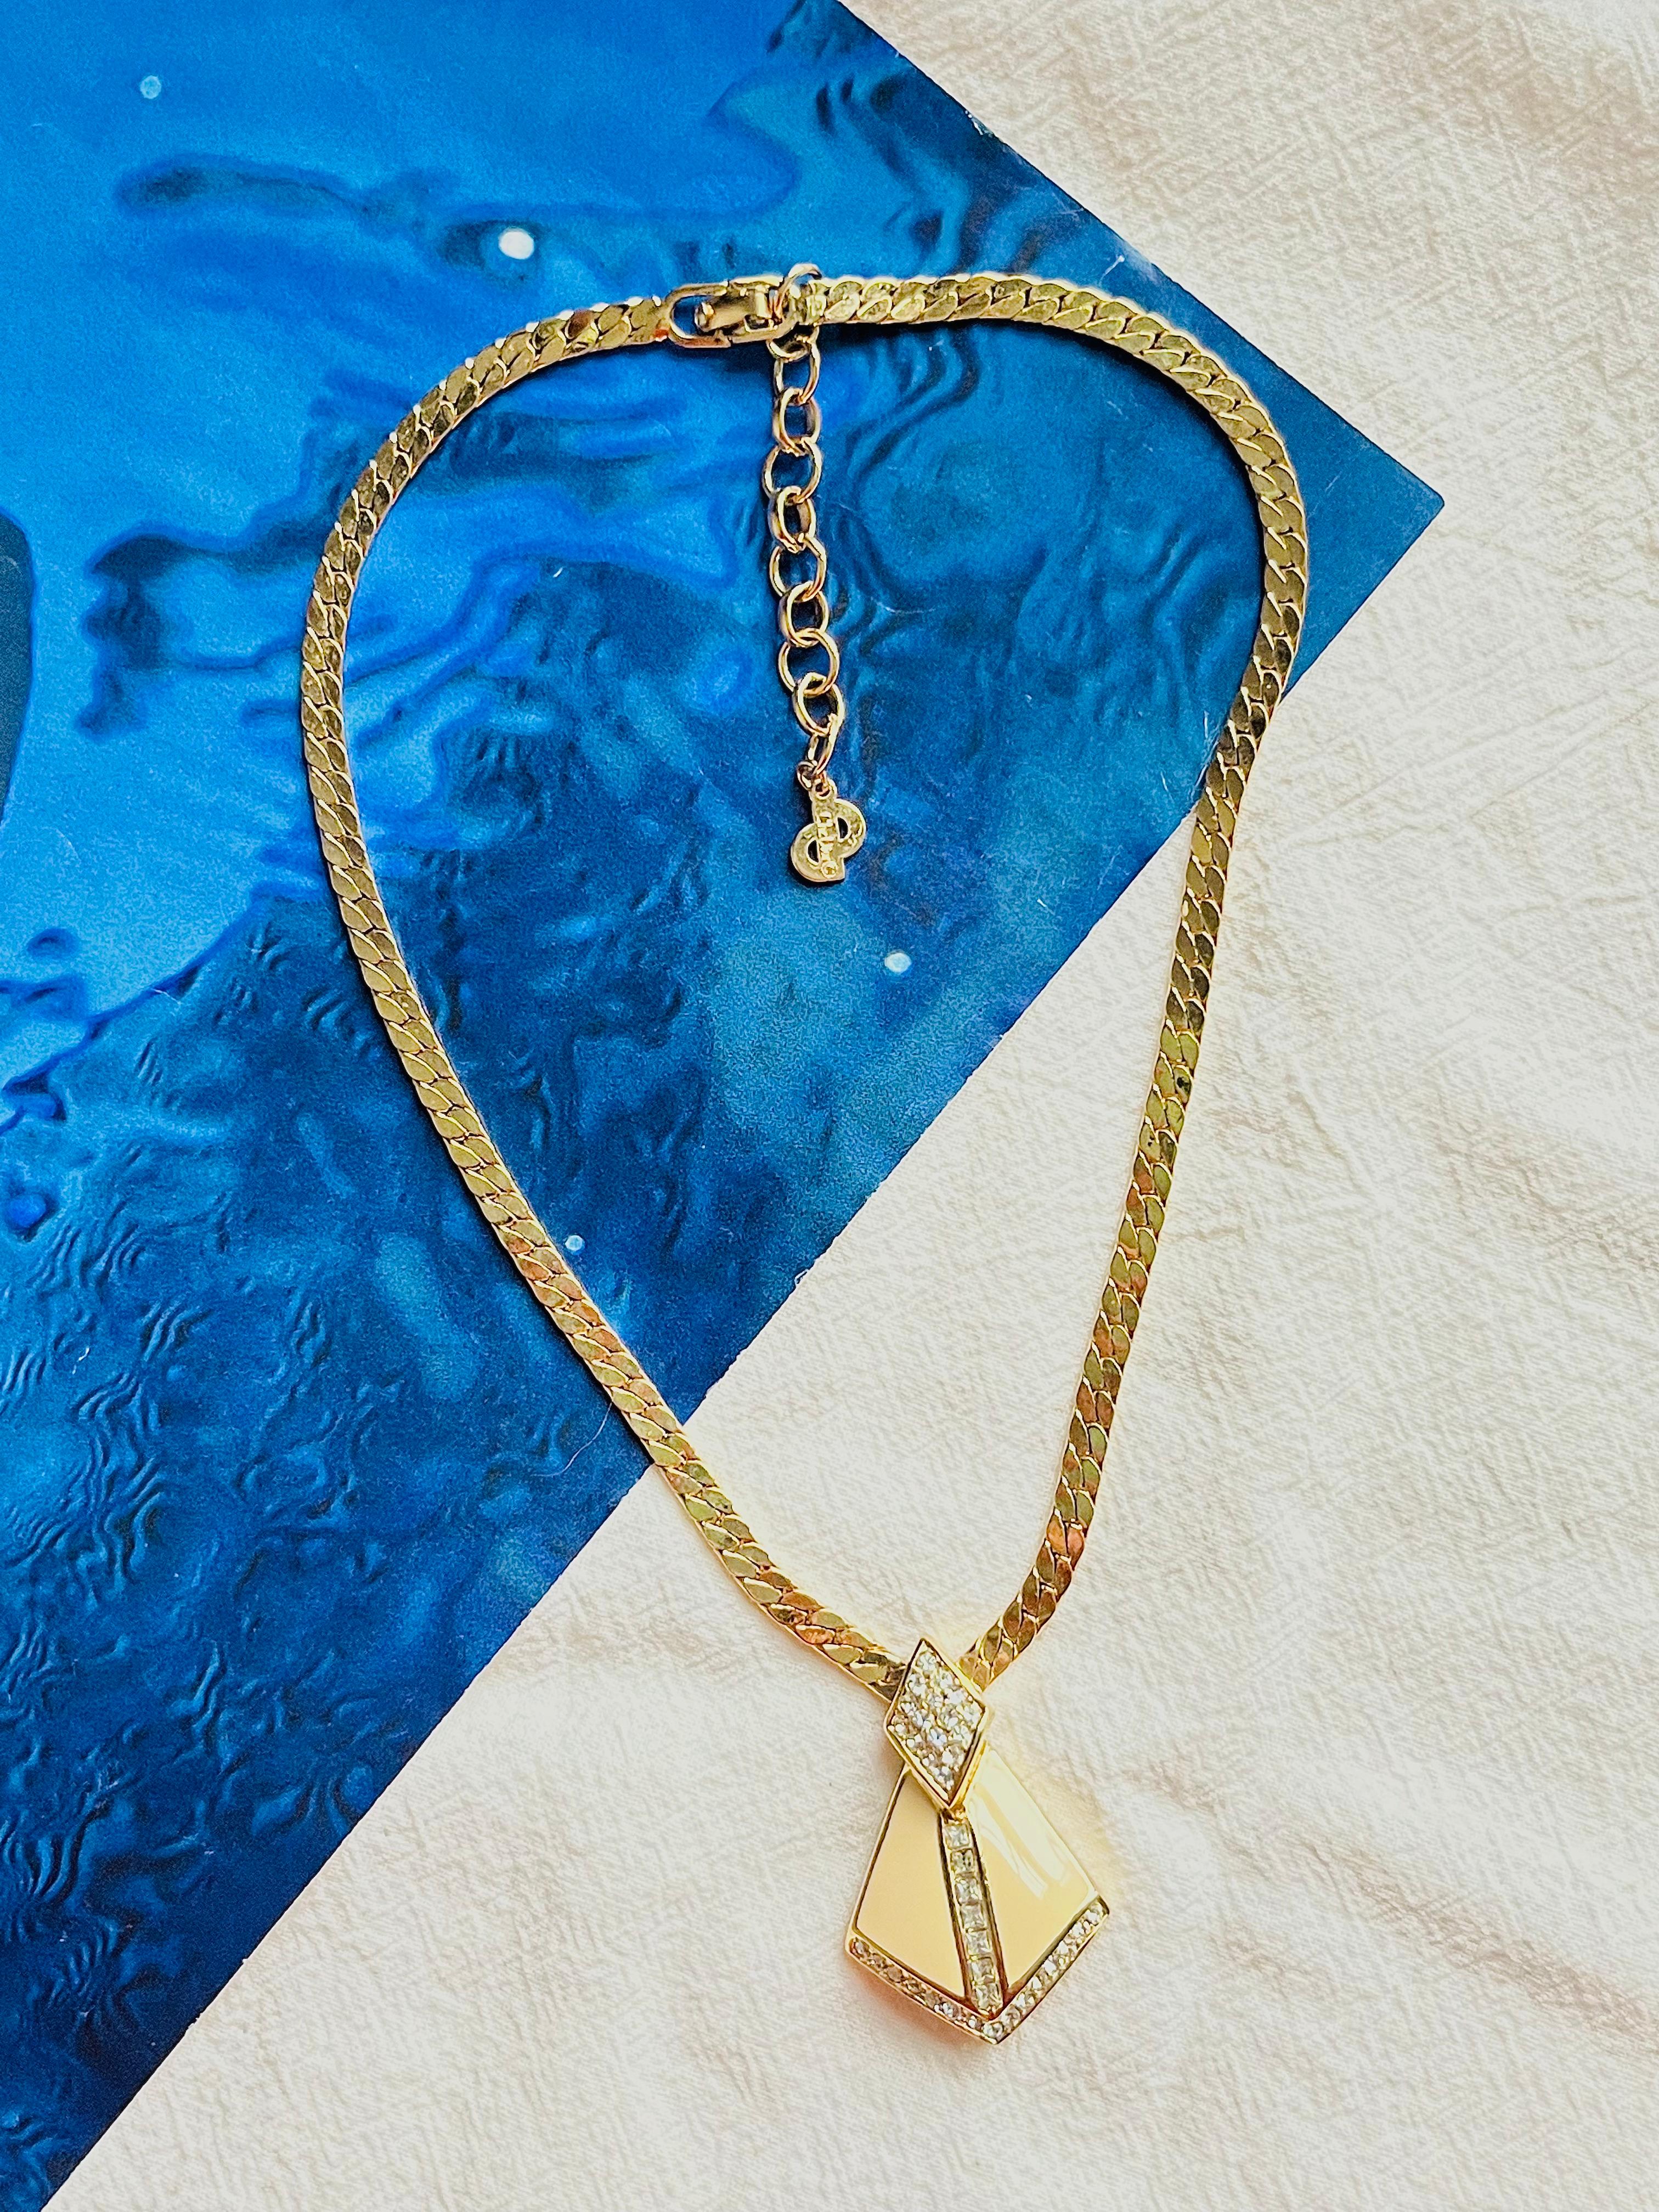 Necklace only. Very good condition. 100% genuine. Marked 'Chr.Dior (C) '.

It is over 40 years old. This is a very stylish and rare piece of jewellery.

Length: 36 cm, extend chain: 6 cm. Pendant: 3.7*2.6 cm.

Weight: 29 g.

_ _ _

Great for